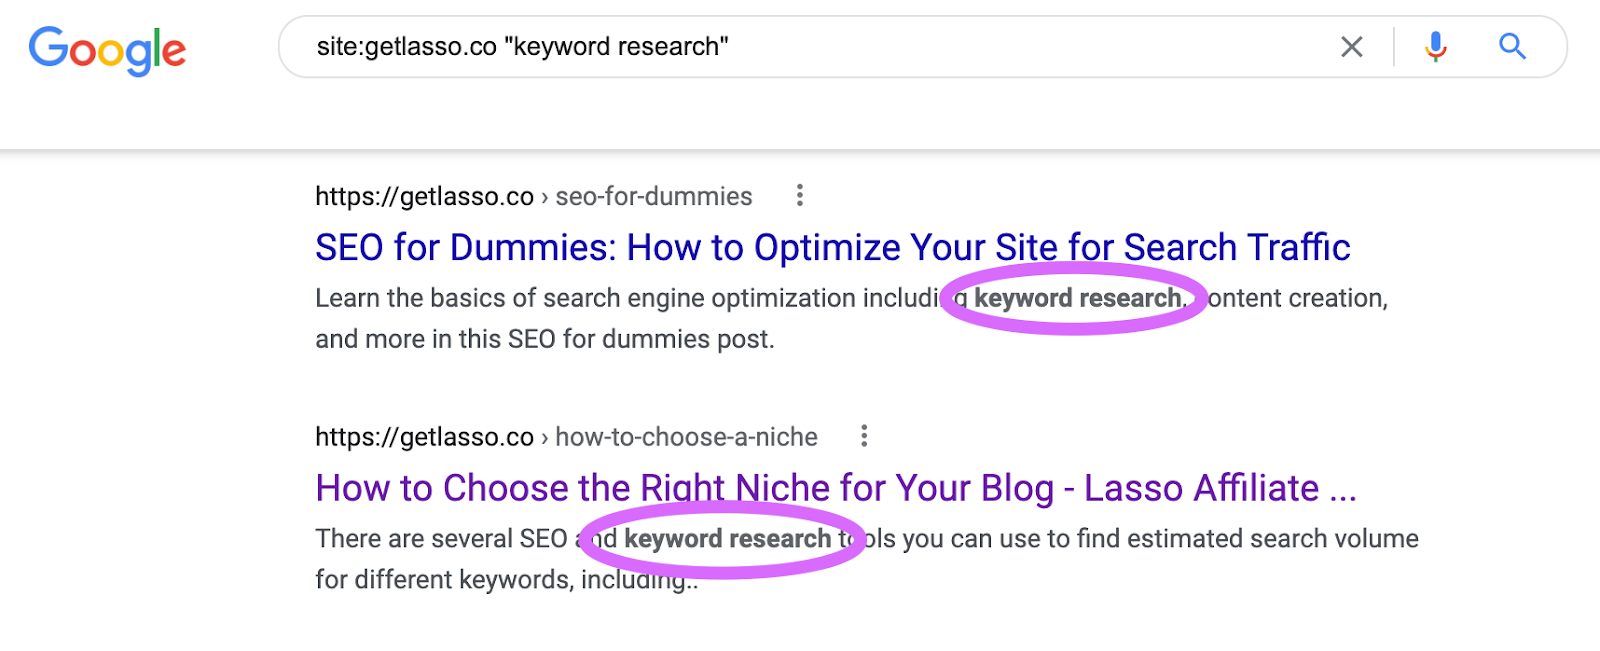 using the site search operator with phrase "keyword research" and seeing examples displayed in the serp